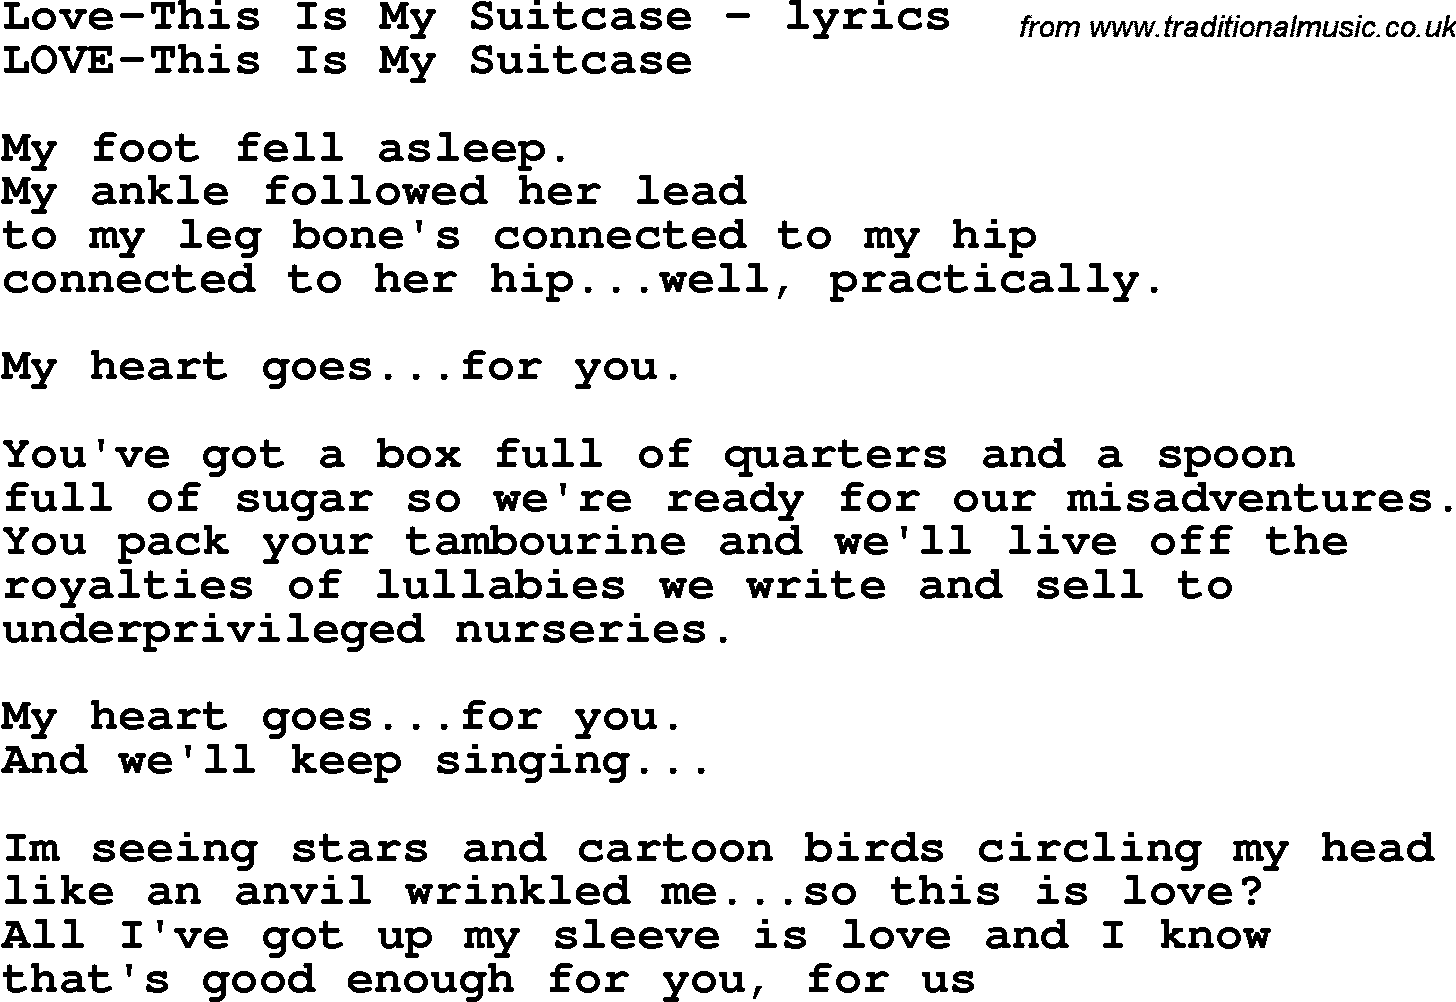 Love Song Lyrics for: Love-This Is My Suitcase